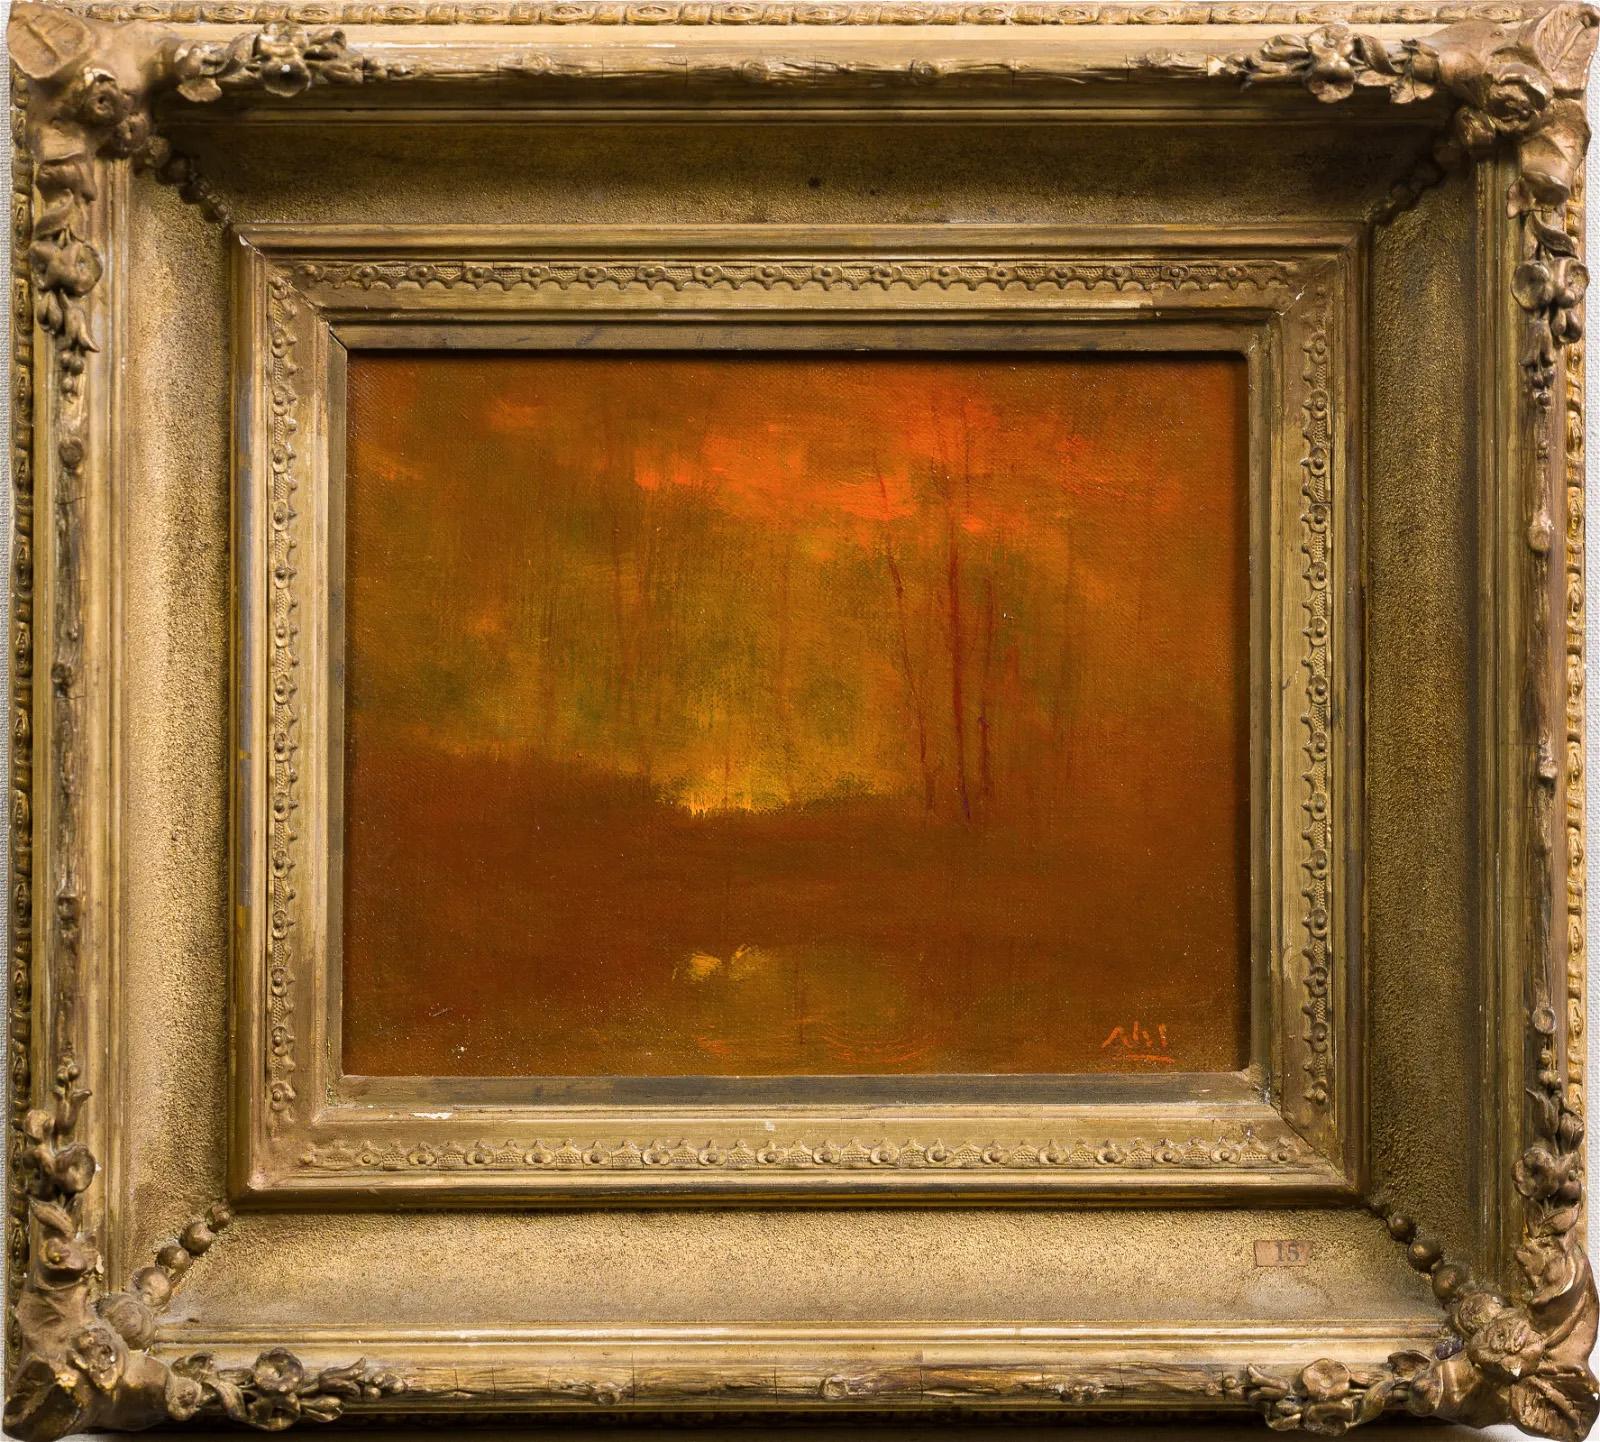 Henry Hammond Ahl  Landscape Painting - Evening Poetry Antique American Tonalist Sunset Exhibited Landscape Oil Painting